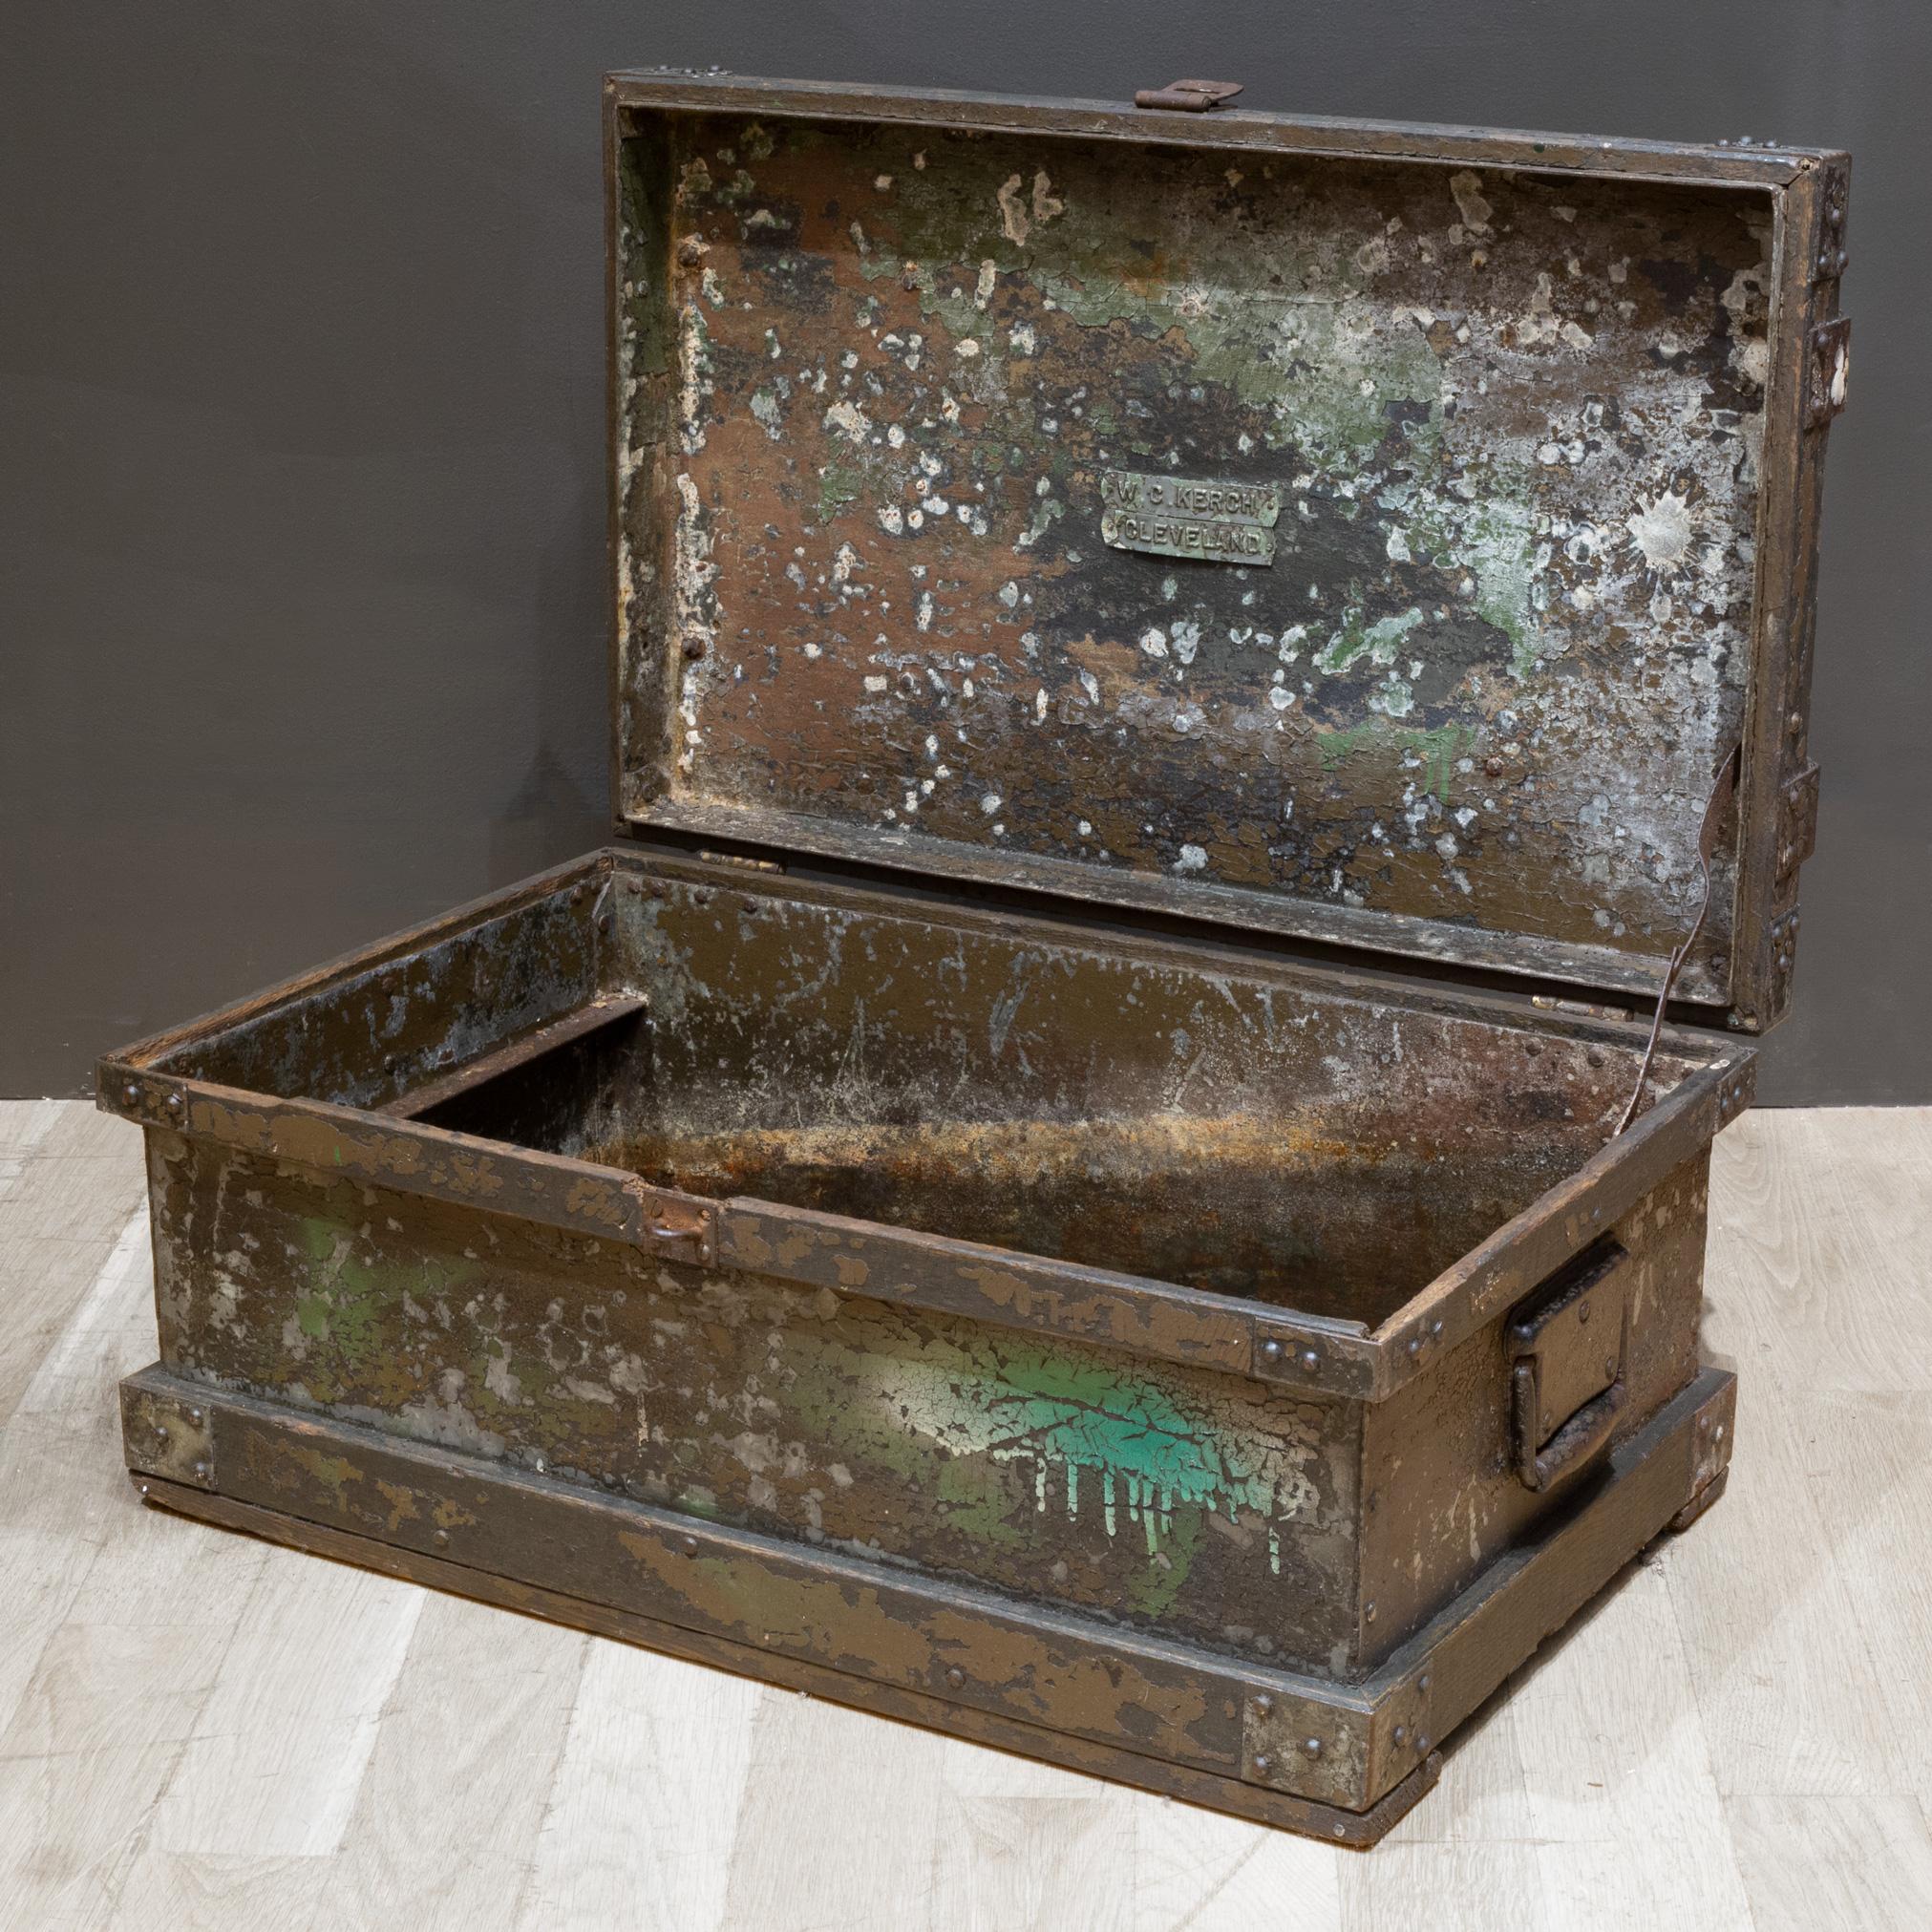 ABOUT

An antique distressed metal chest with cast iron handles and wooden straps. Original metal label inside.

    CREATOR W.C. Kerch, Cleveland.
    DATE OF MANUFACTURE c.1930-1940.
    MATERIALS AND TECHNIQUES Wood, Cast Iron, Metal.
   